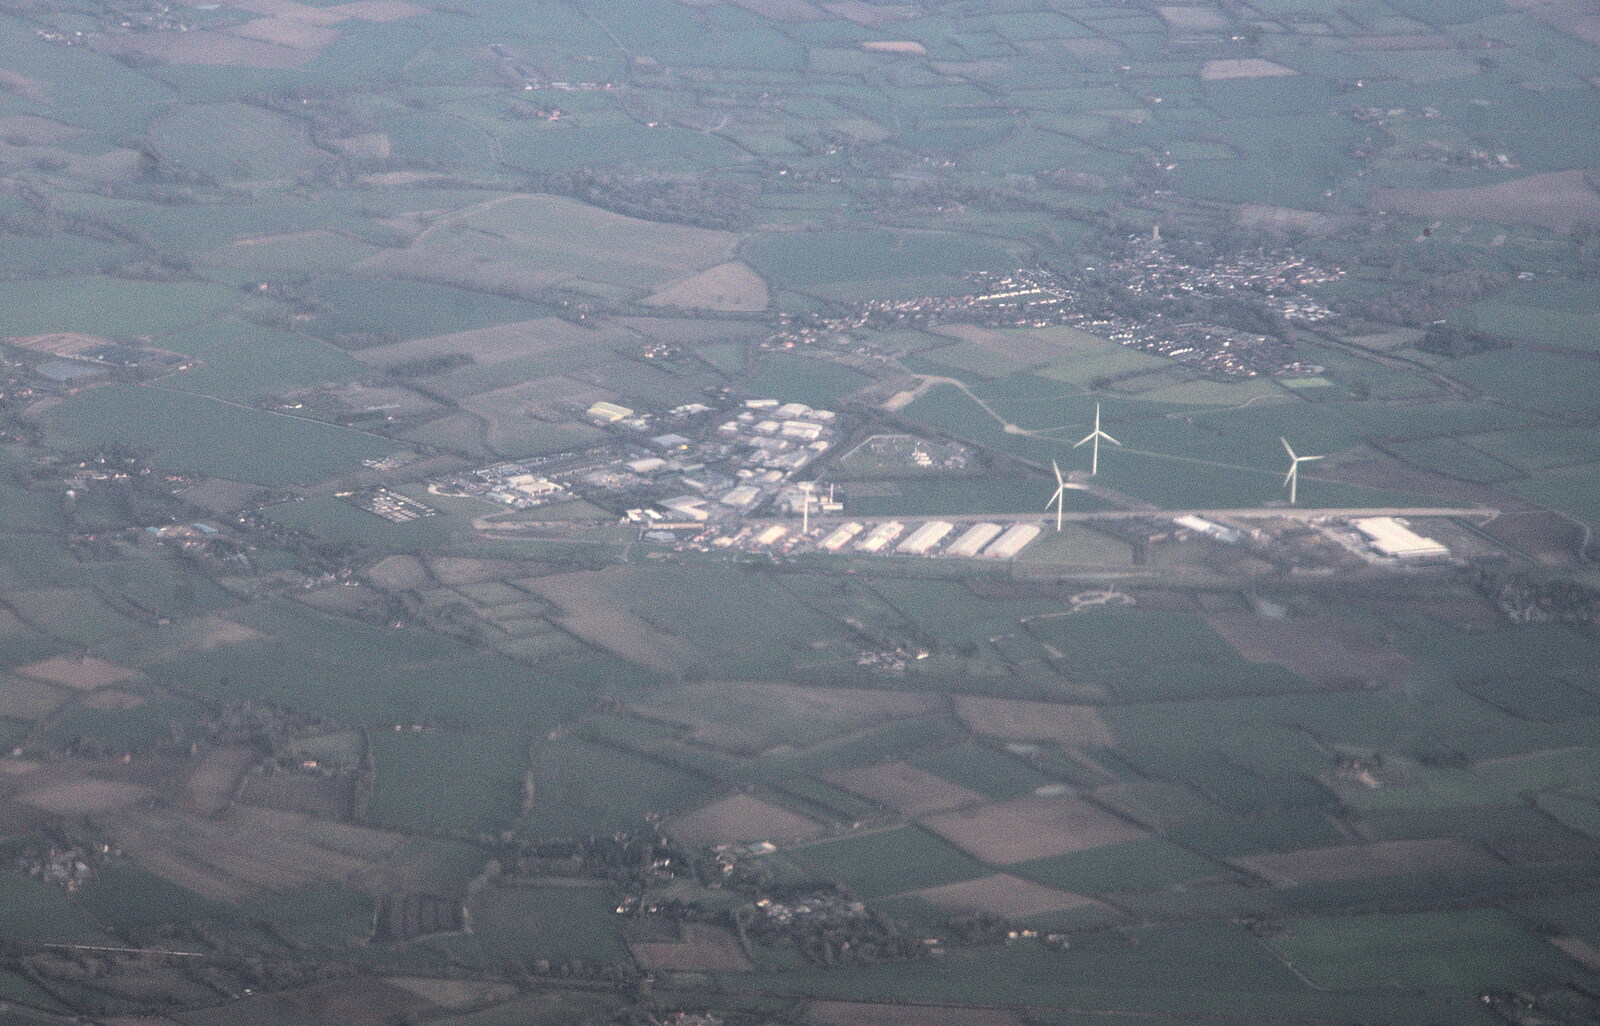 Eye Airfield from 8,000 feet or so from Devon In A Day, Exeter, Devon - 14th March 2019